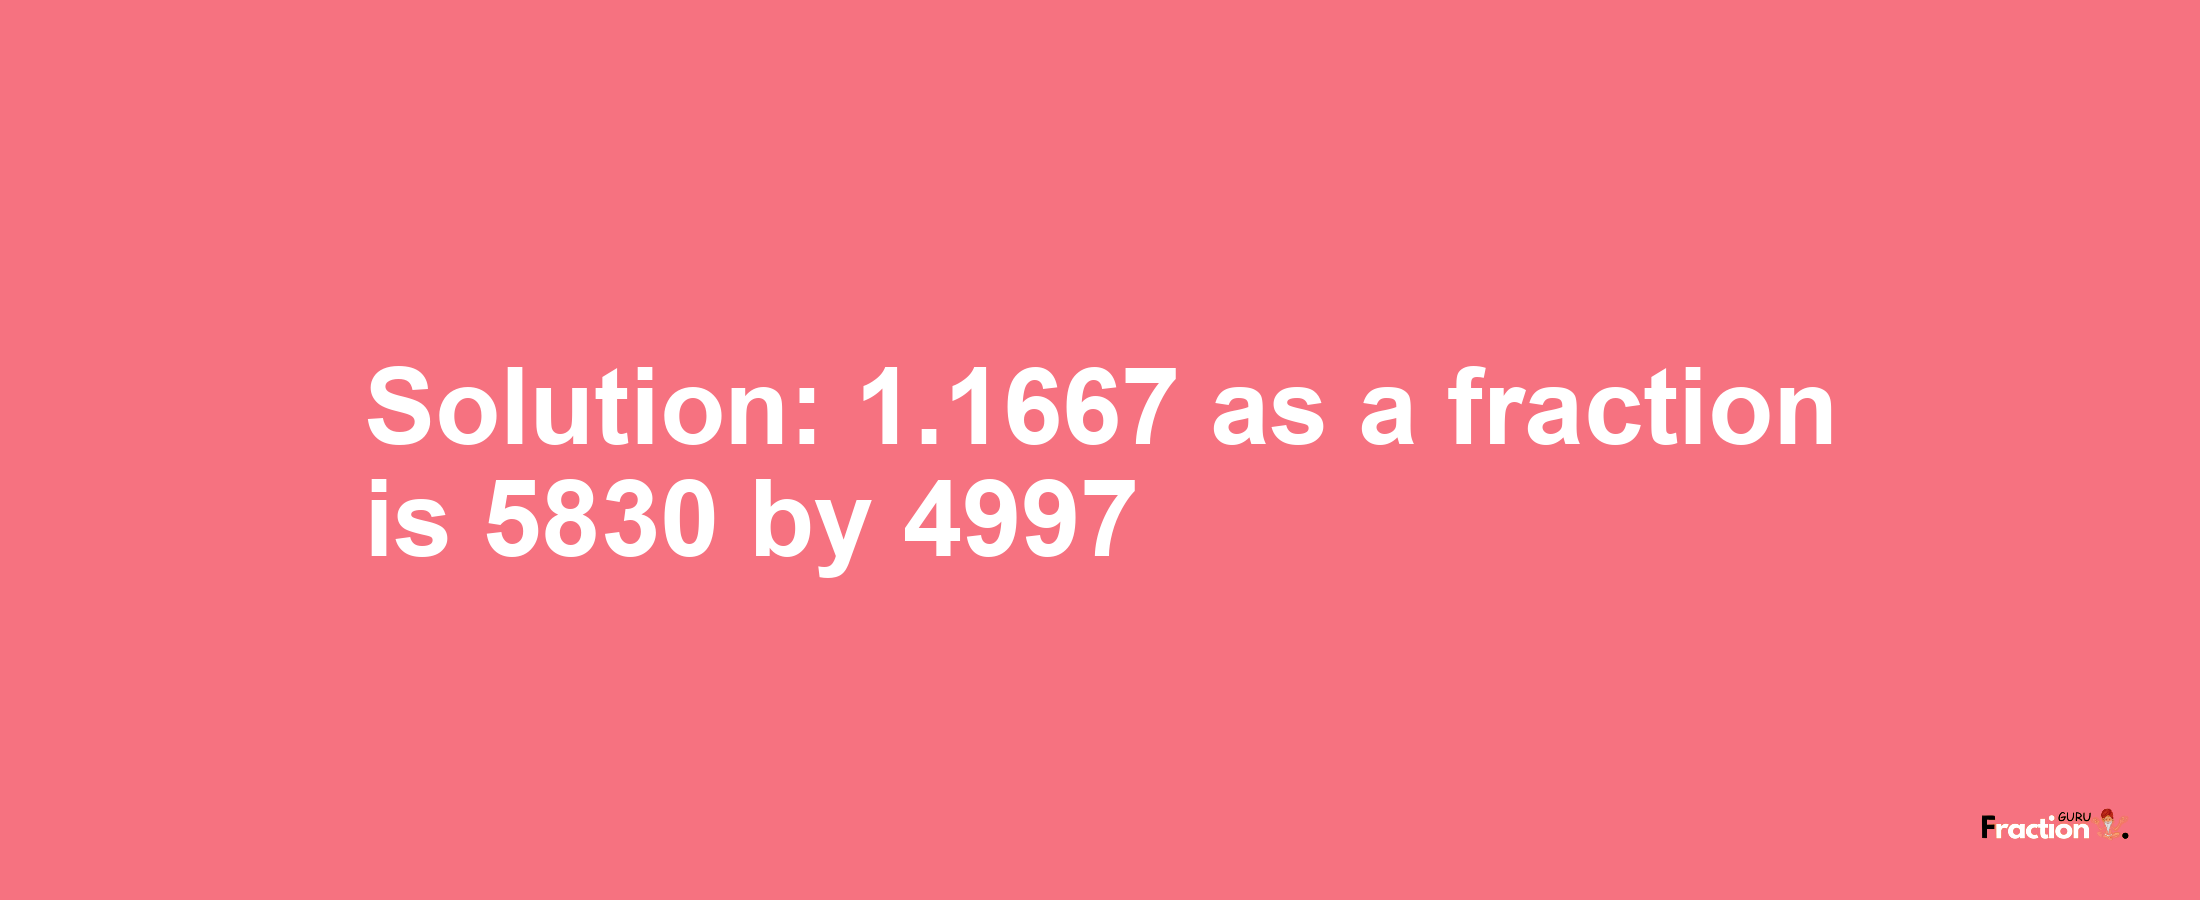 Solution:1.1667 as a fraction is 5830/4997